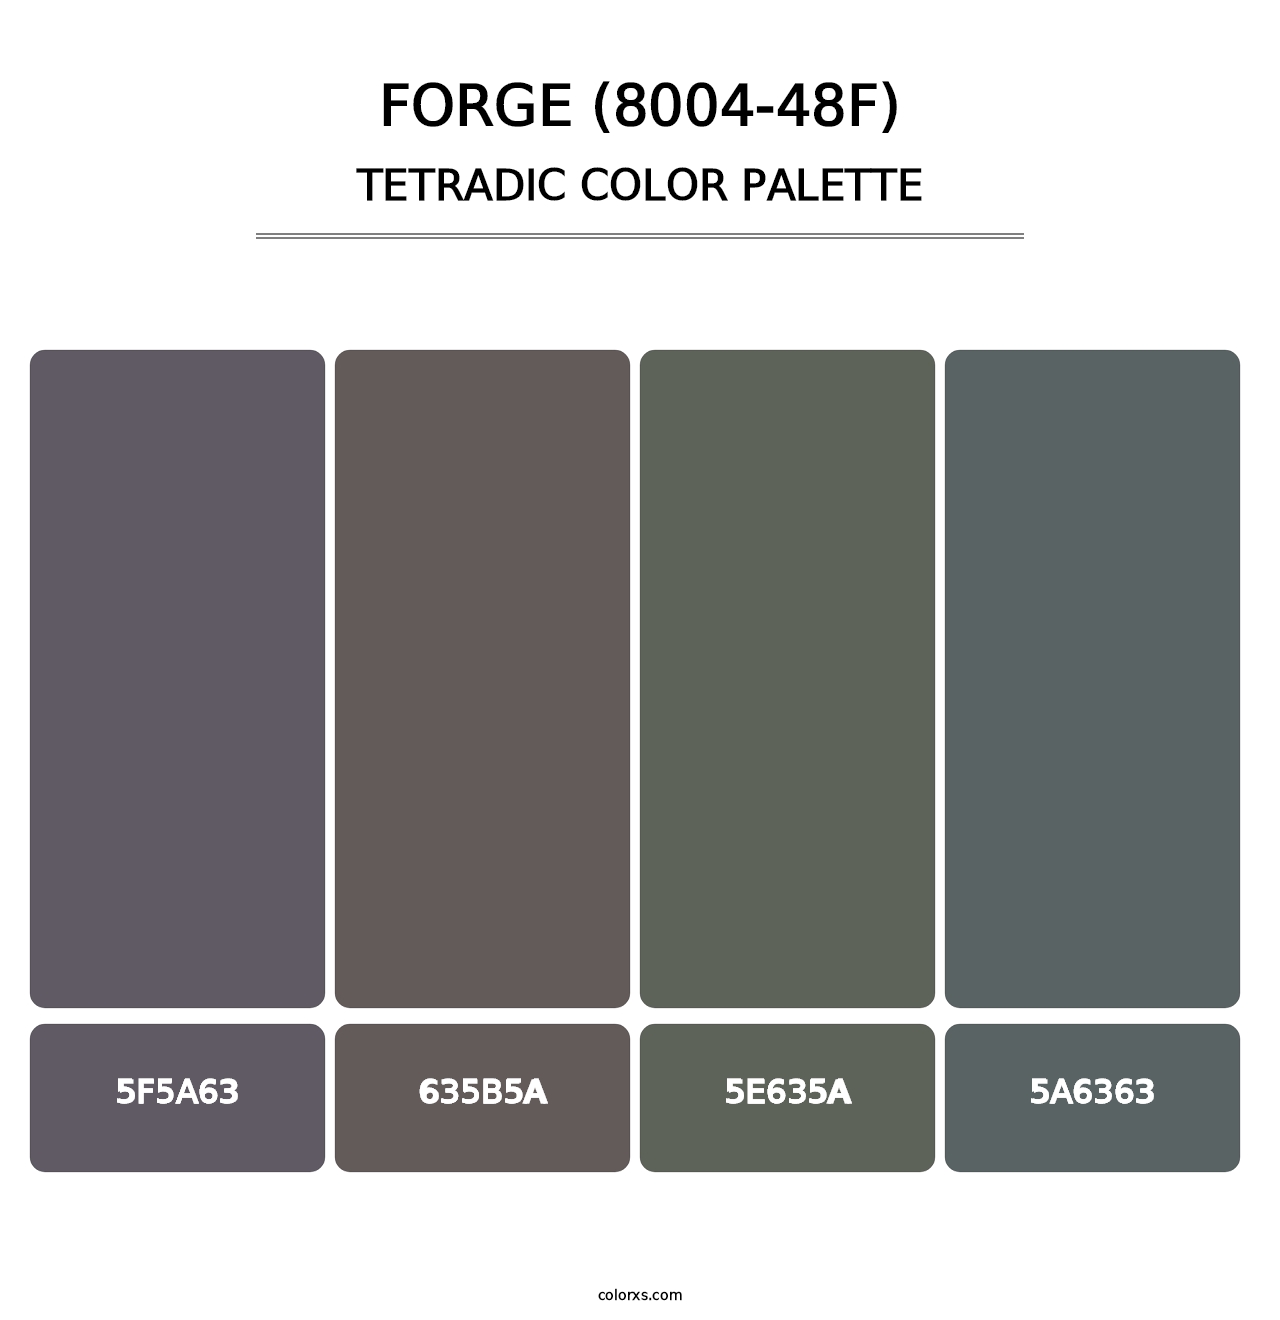 Forge (8004-48F) - Tetradic Color Palette